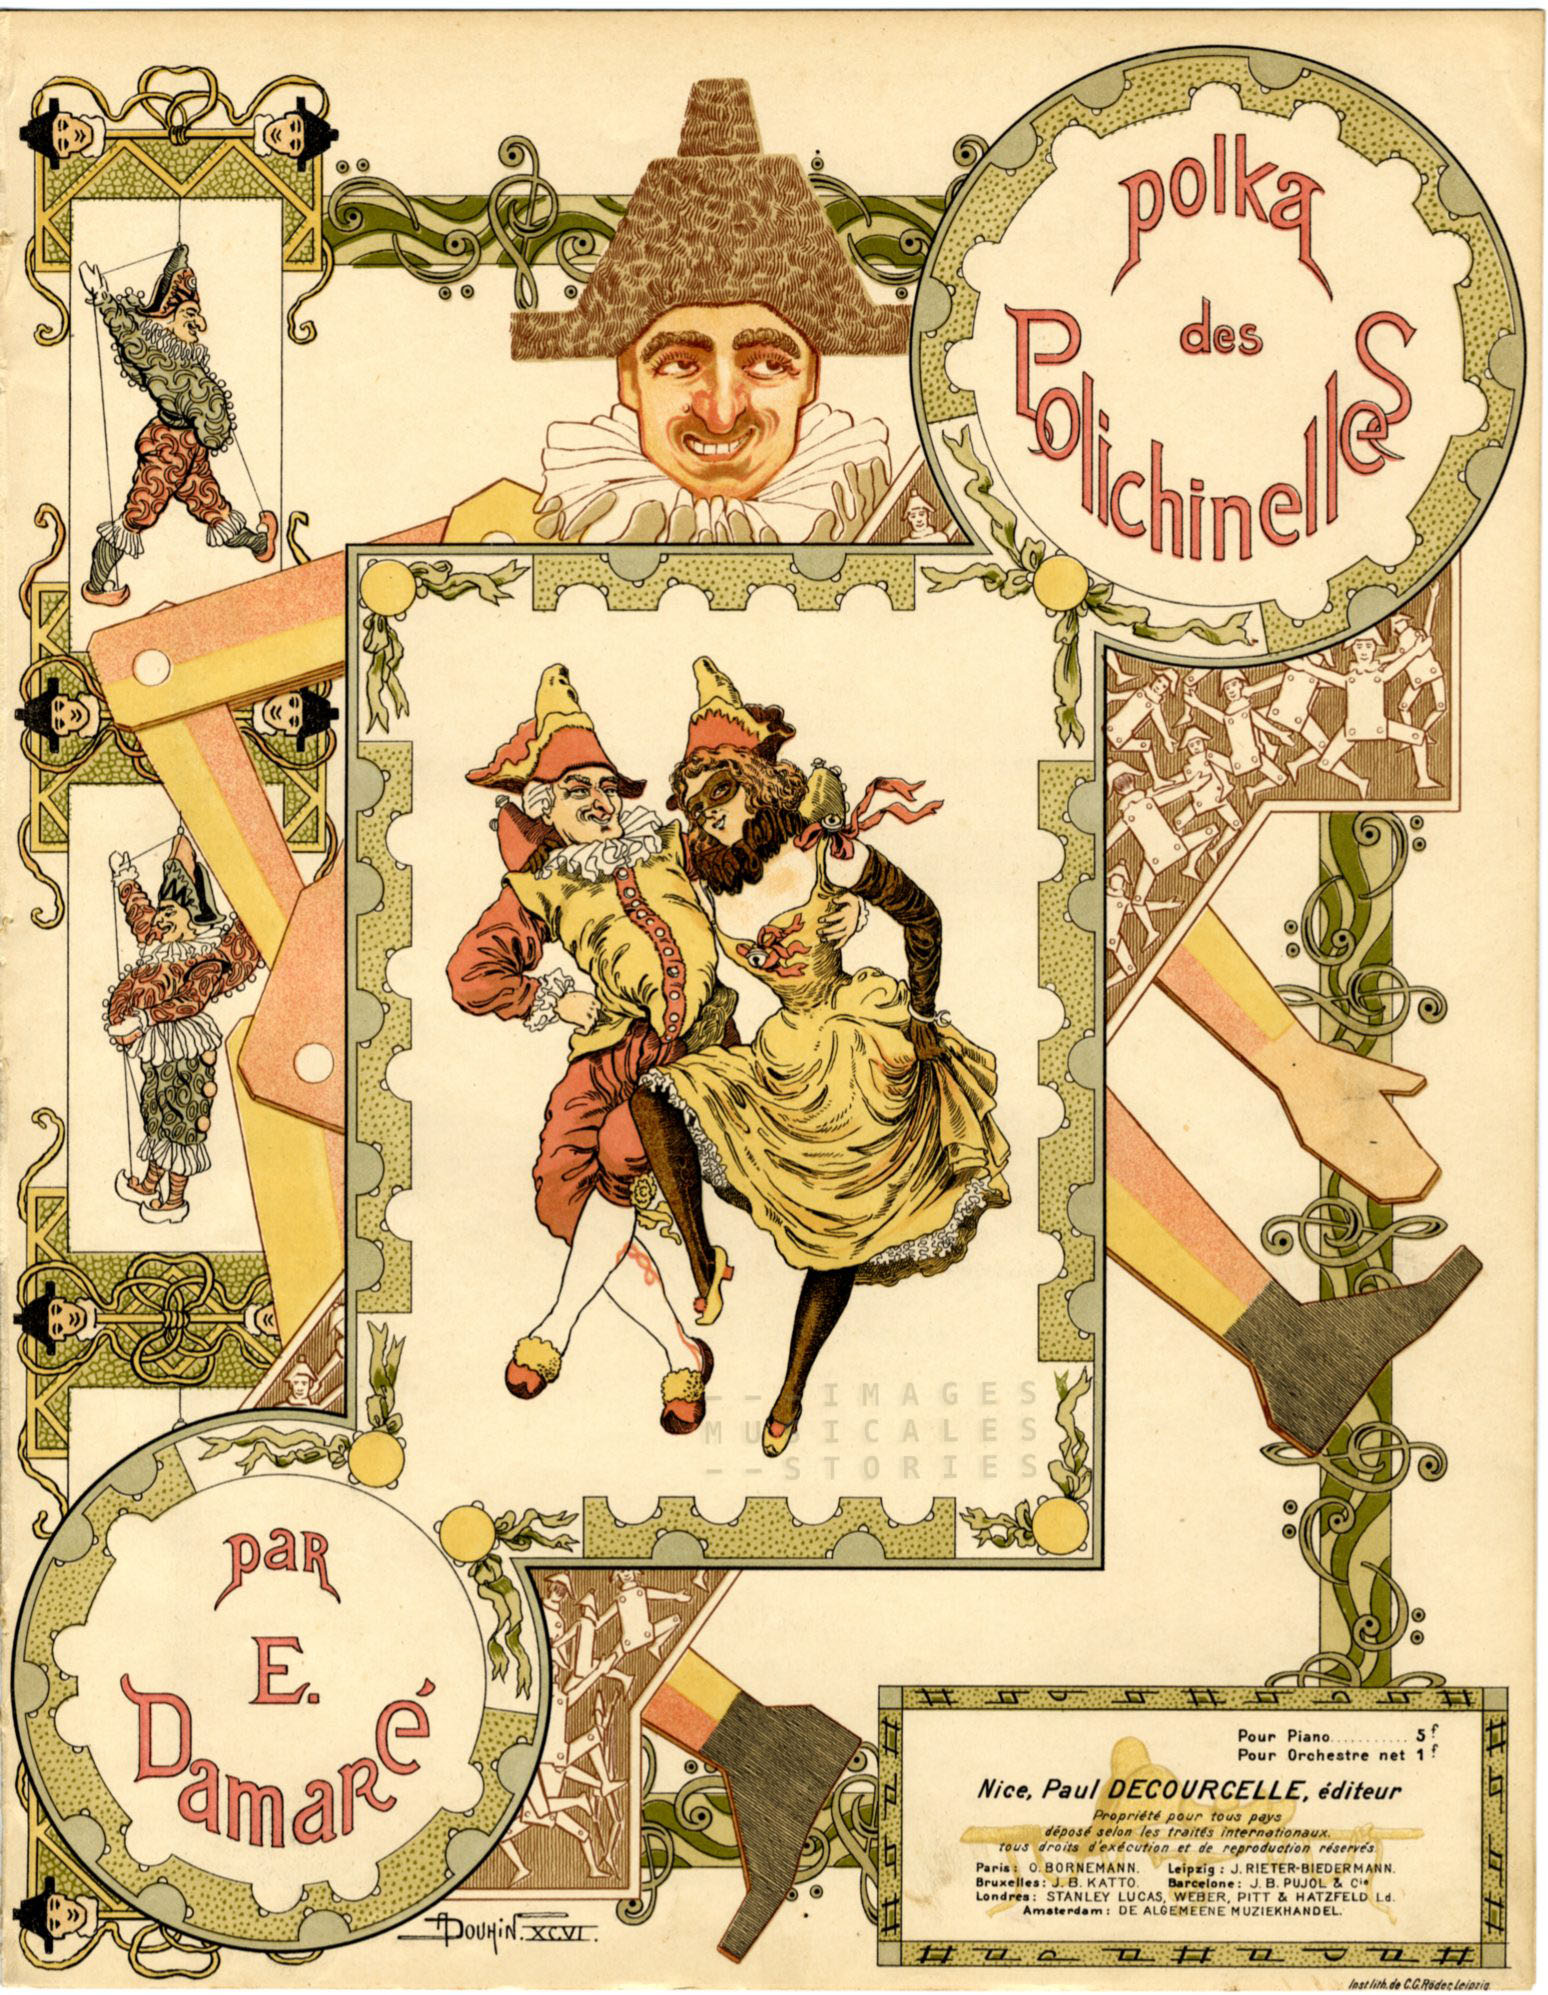 cover illustration by Douhin for 'Polka des Polichinelles' (1906)